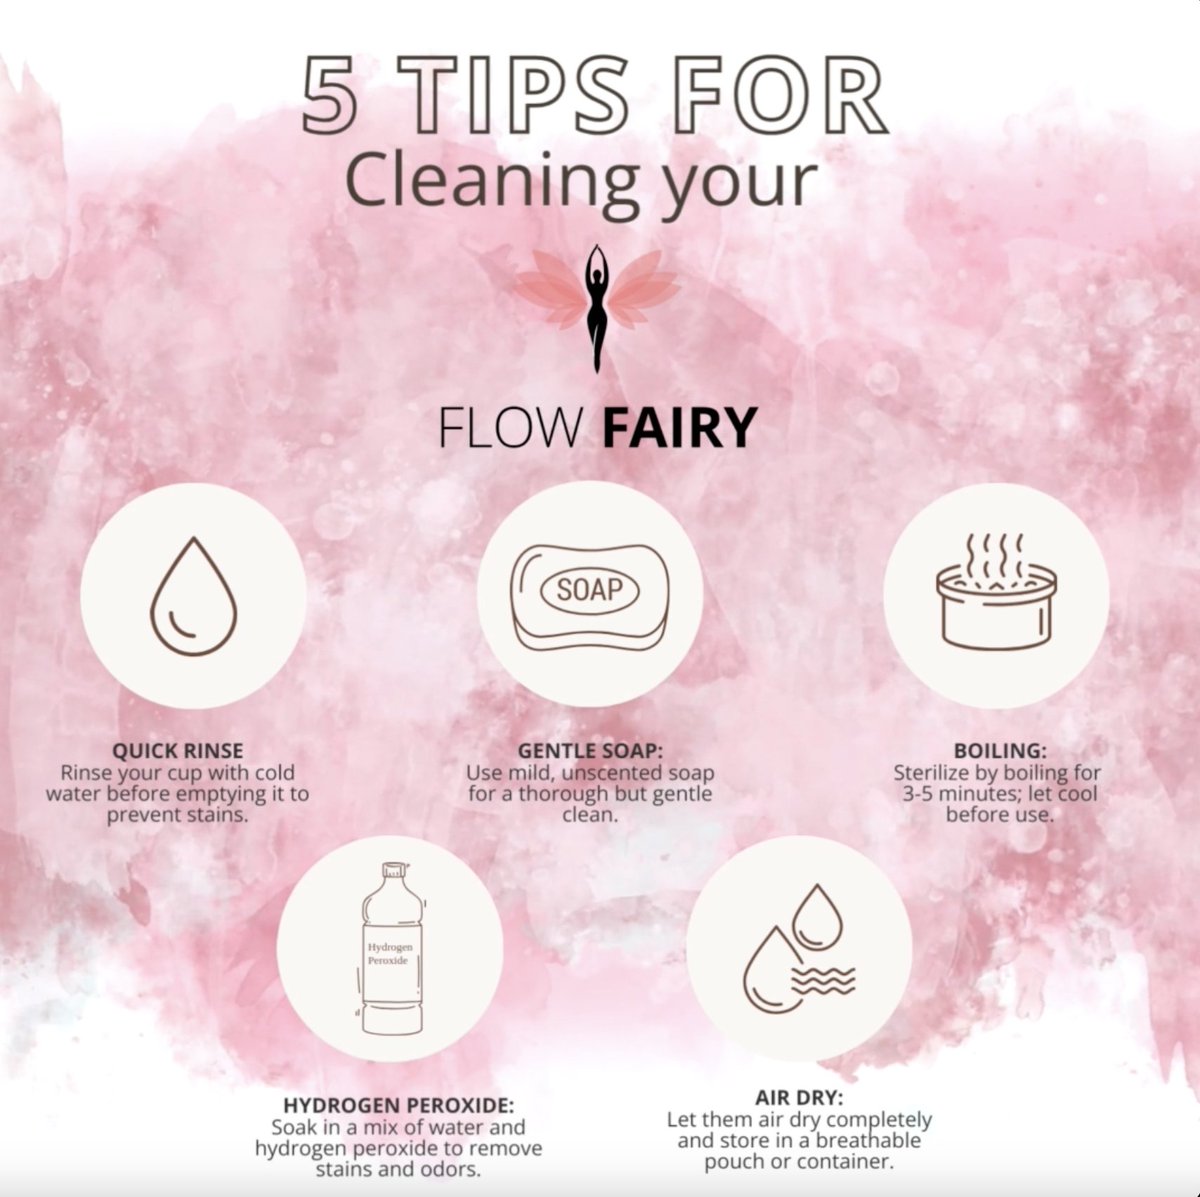 Keep your Flow Fairy menstrual cup clean with these 5 cleaning tips! 🌸💧✨⬆️

#FlowFairy #FlowWithConfidence #Flow #SustainableSwitch #PeriodPower #OwnYourPeriod #MenstrualCupApplicator #MenstrualCup #PeriodProducts #ReusableProducts #EcoFriendlyPeriod #CleaningTips